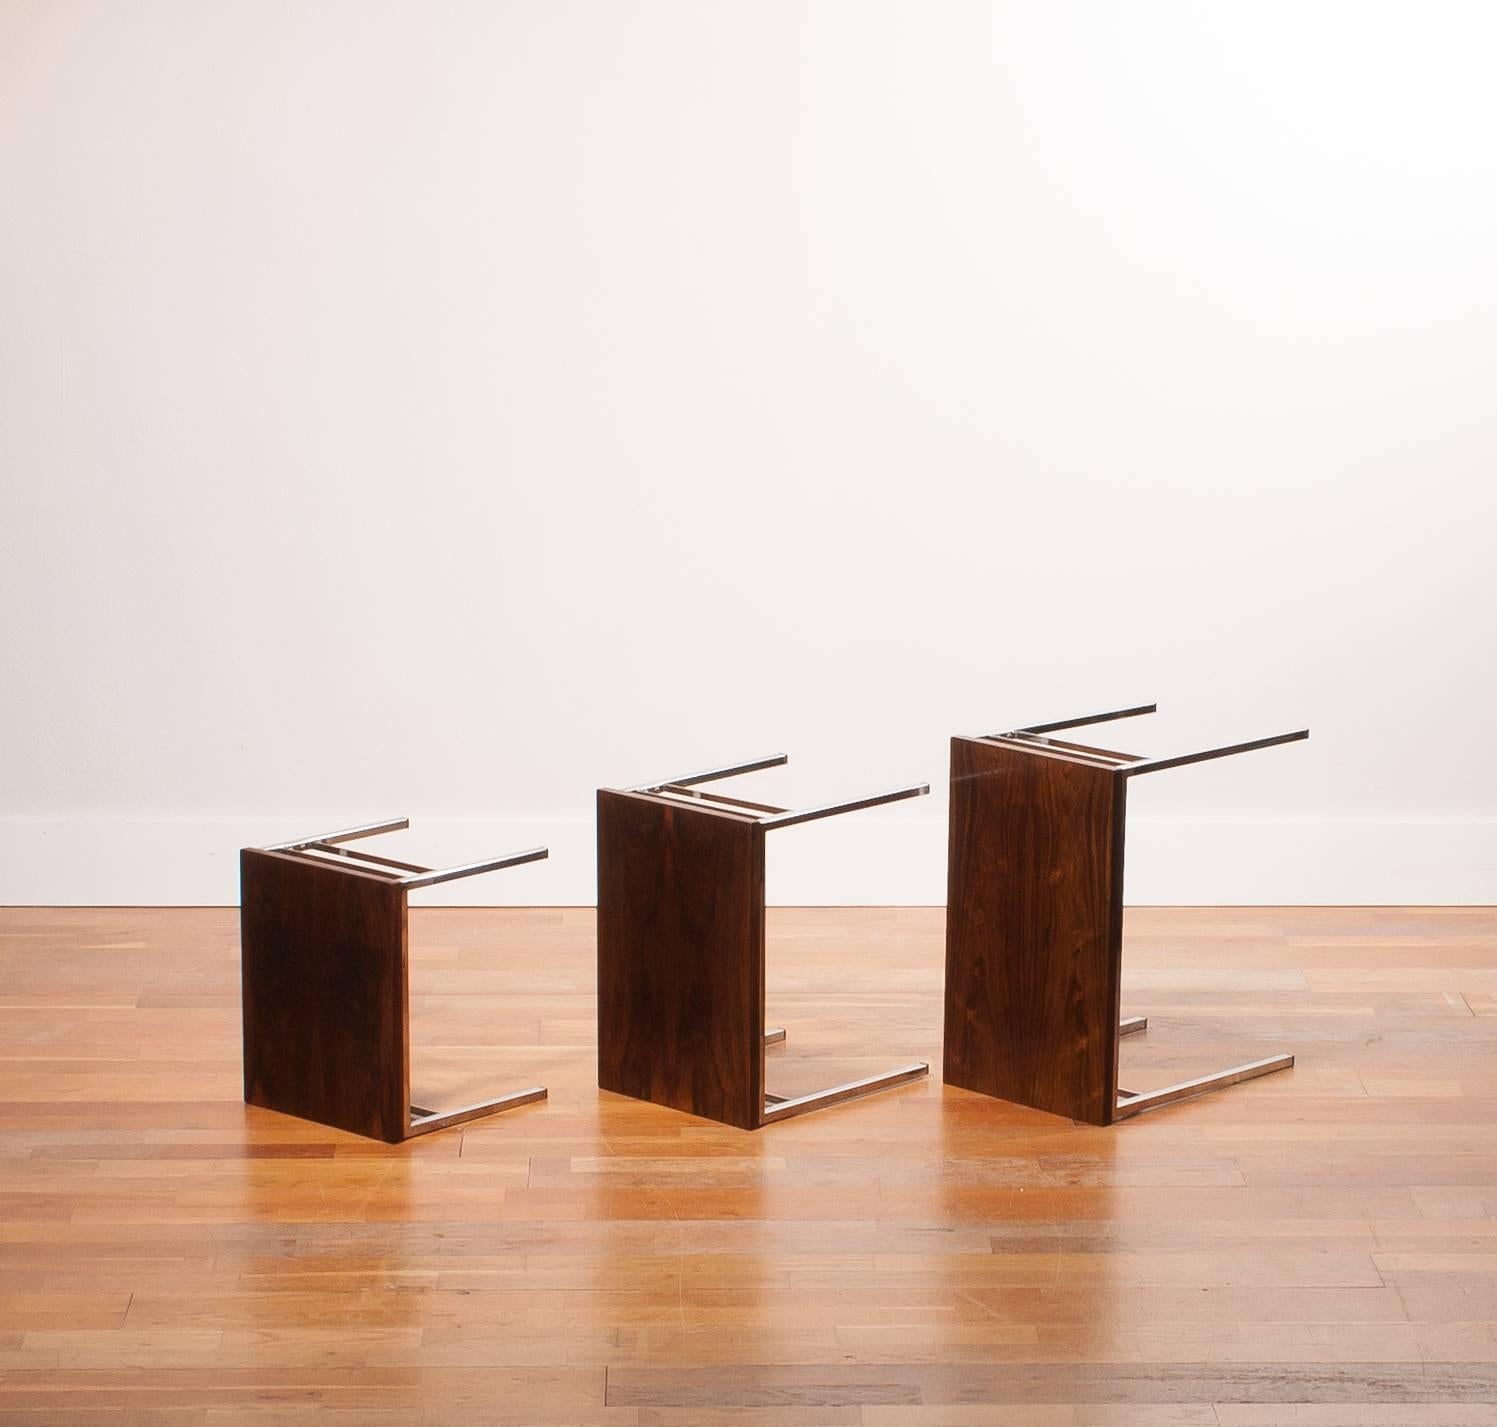 A beautiful three set nesting tables.
These are made of rosewood table tops on chrome frames.
They are in a very nice condition.
Period 1960s
Dimensions: Largest H. 42 cm, W. 50 cm, D. 30 cm
Middle H. 36 cm, W. 43 cm, D. 30 cm
Smallest H. 30